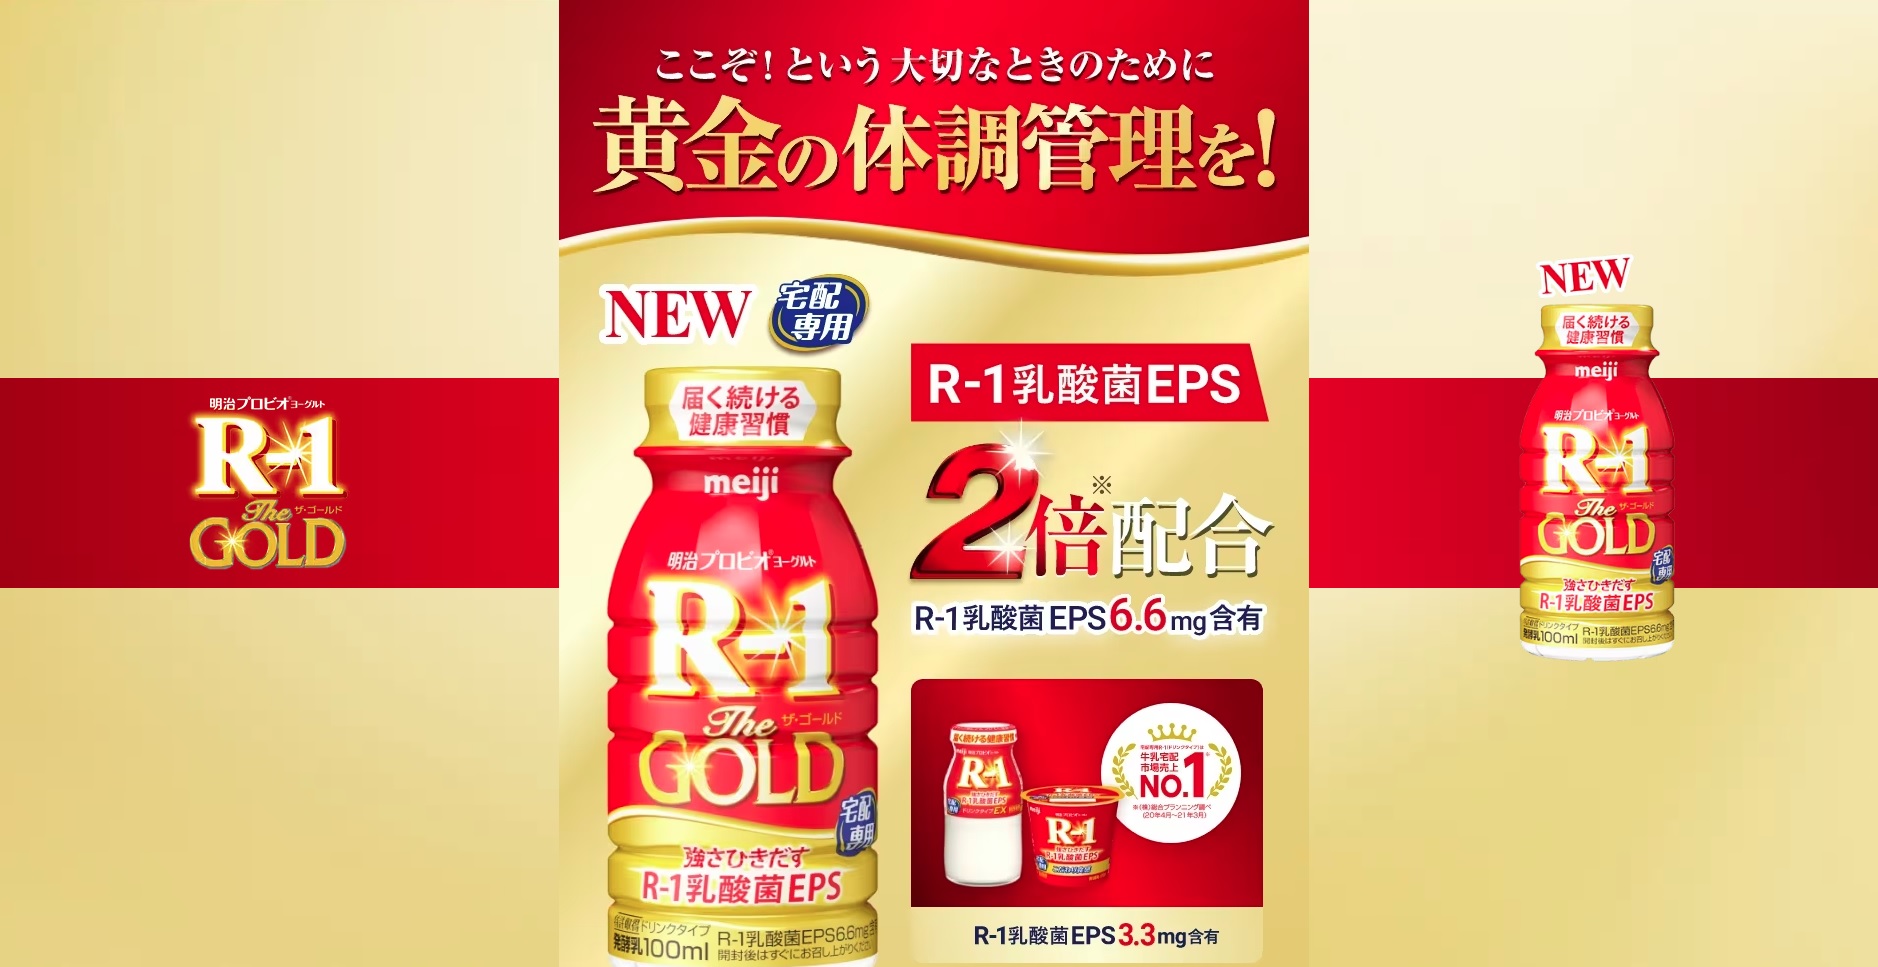 【R-1 the GOLD】新発売！